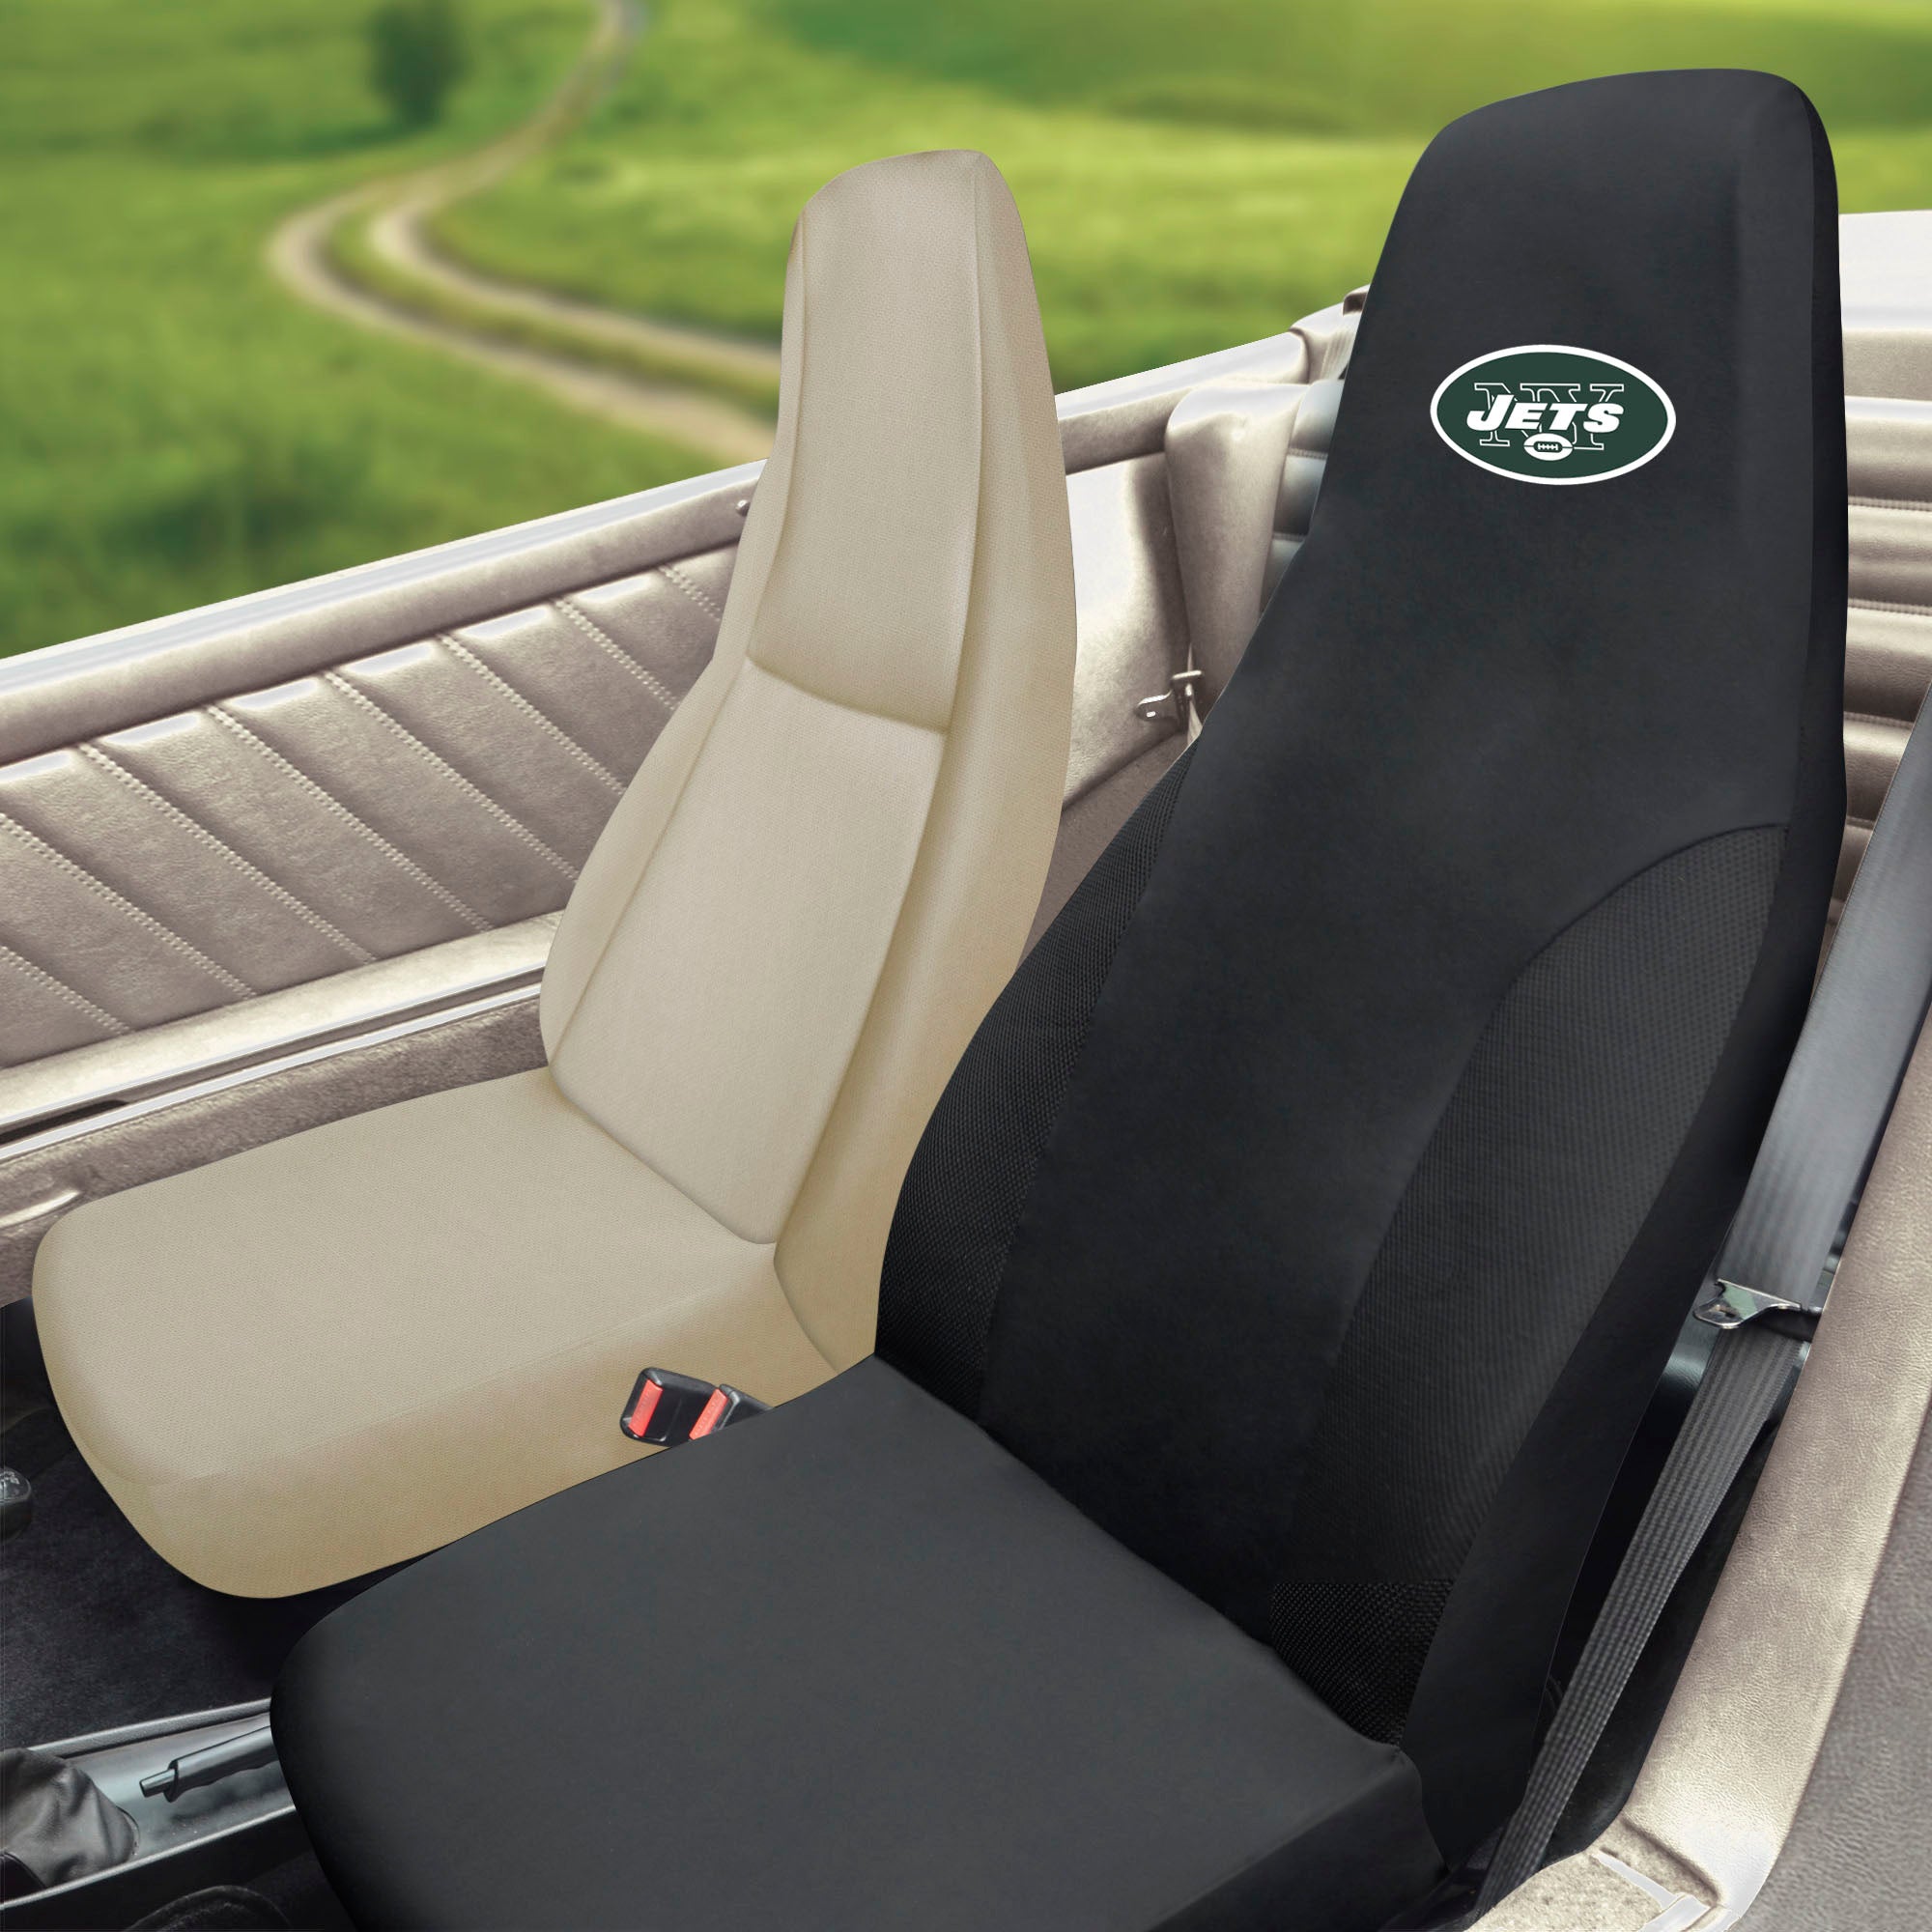 NFL - New York Jets Set of 2 Car Seat Covers